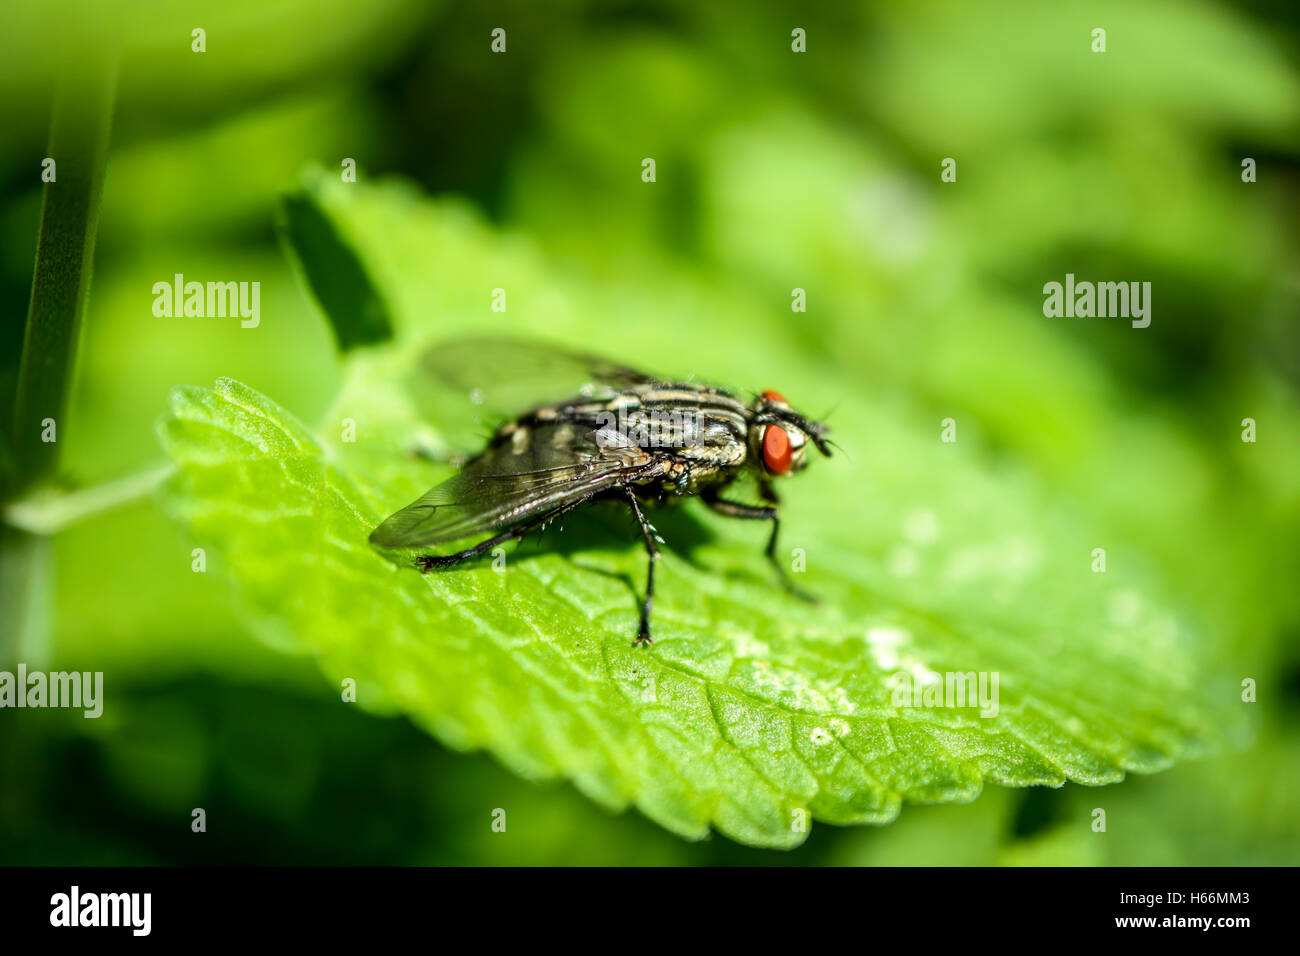 Housefly sitting on a Green leaf in Ireland Stock Photo